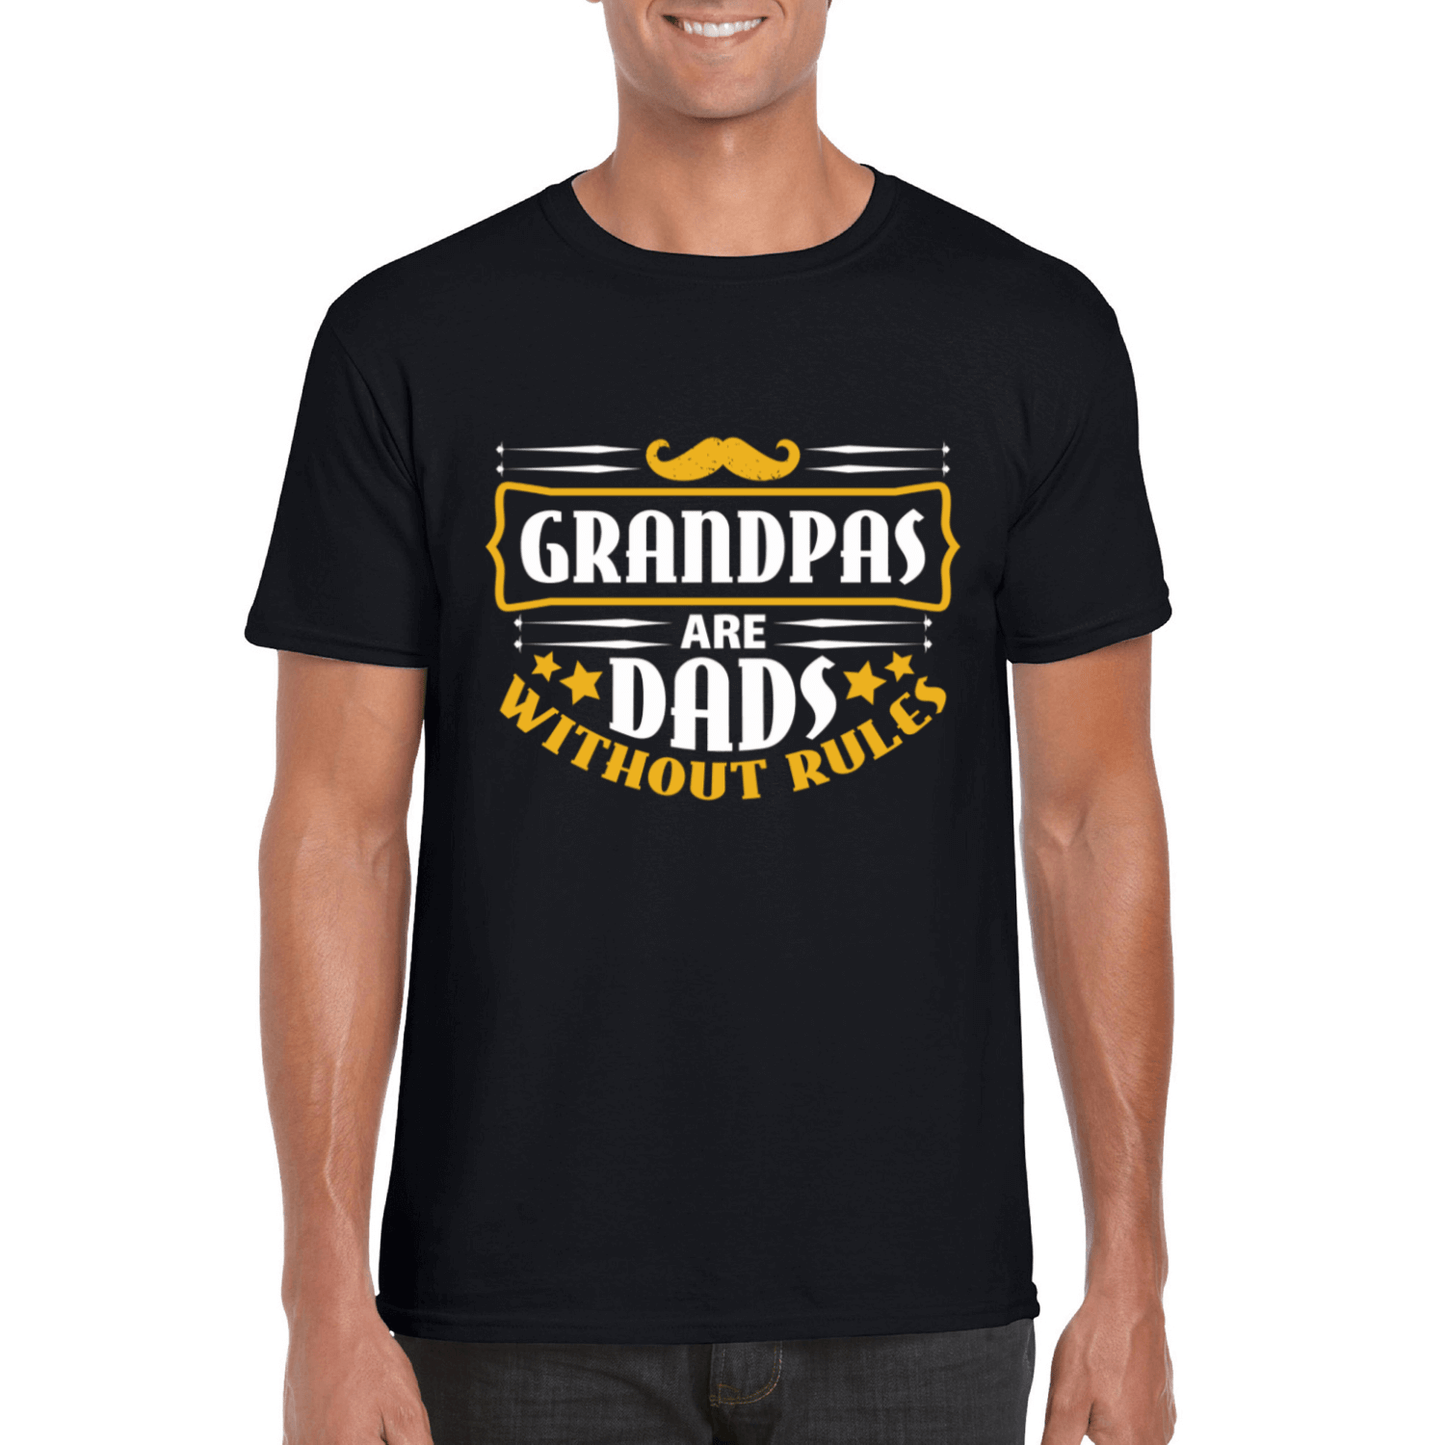 Celebrate Grandpa's Love With A Touch Of Humor - Grandpas Are Dads Without Rules T-Shirt